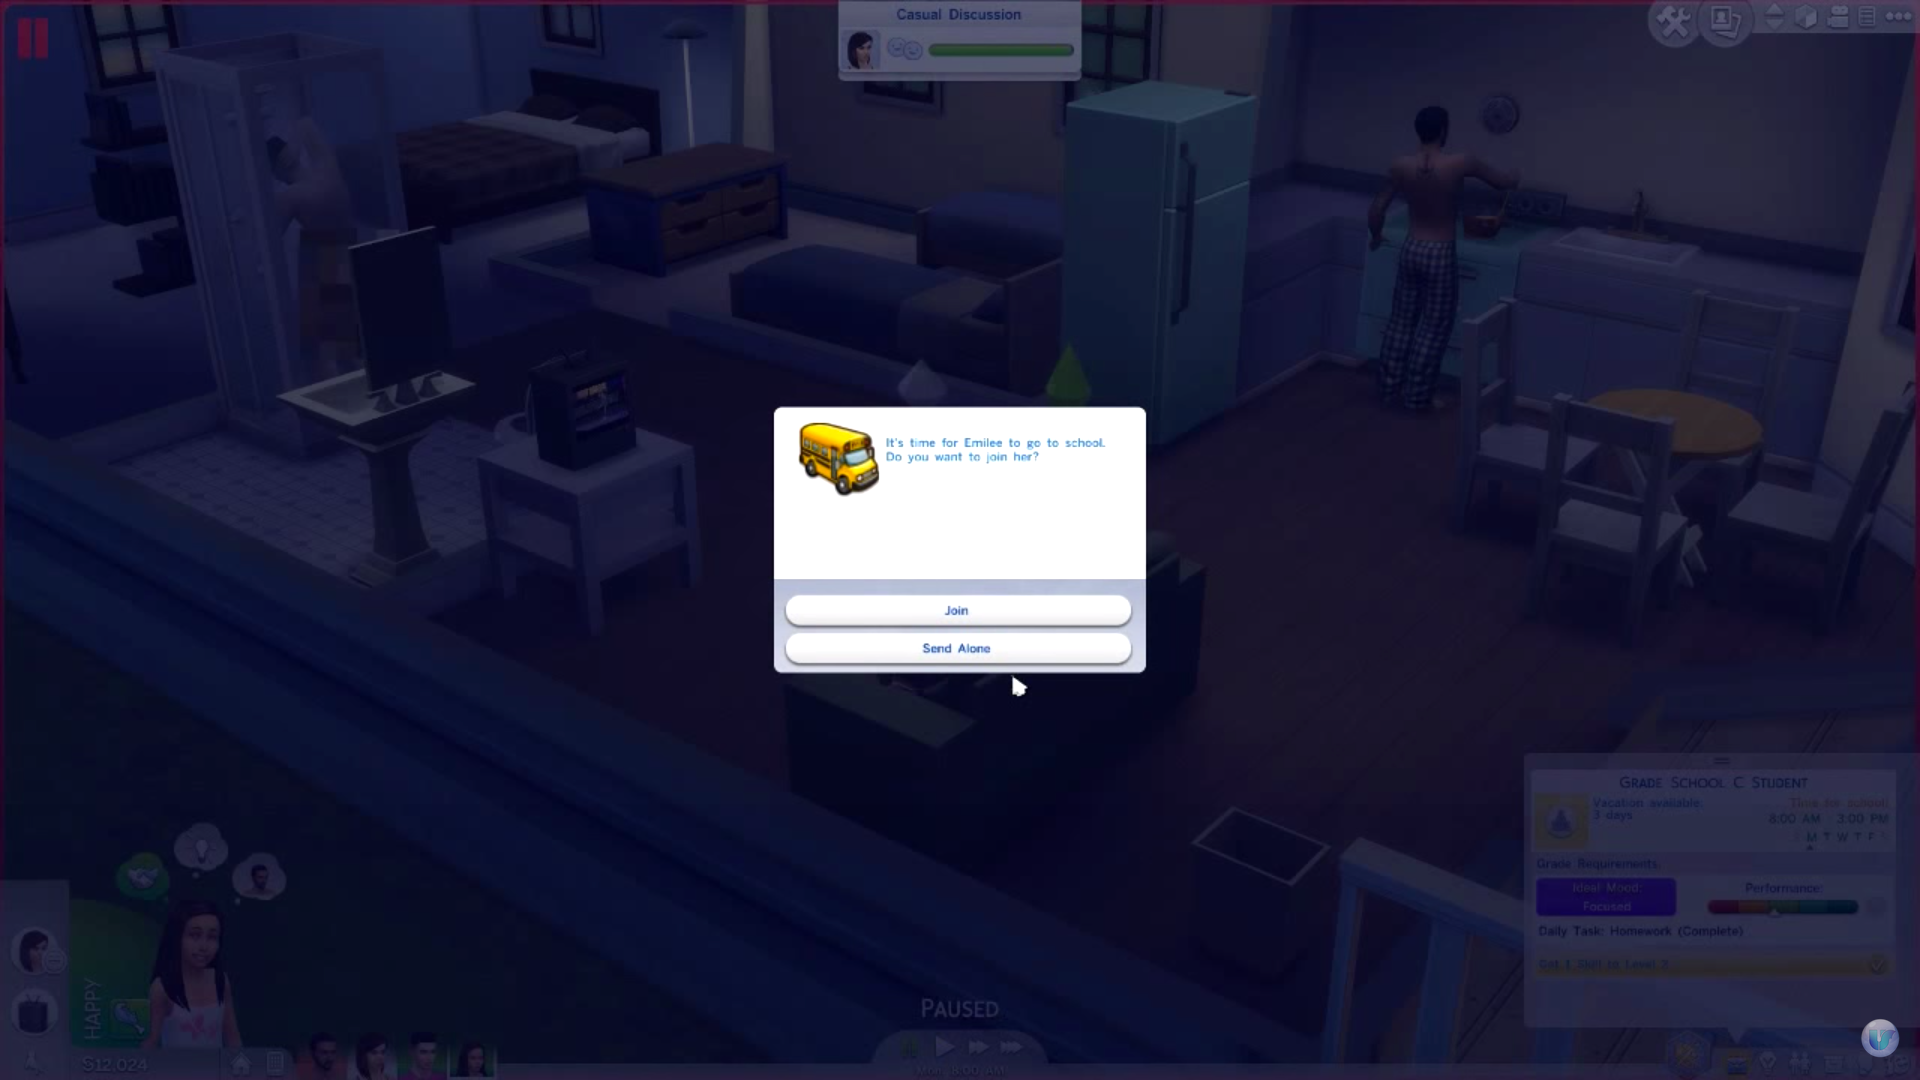 if you have download a sims 4 school cc do you need mod